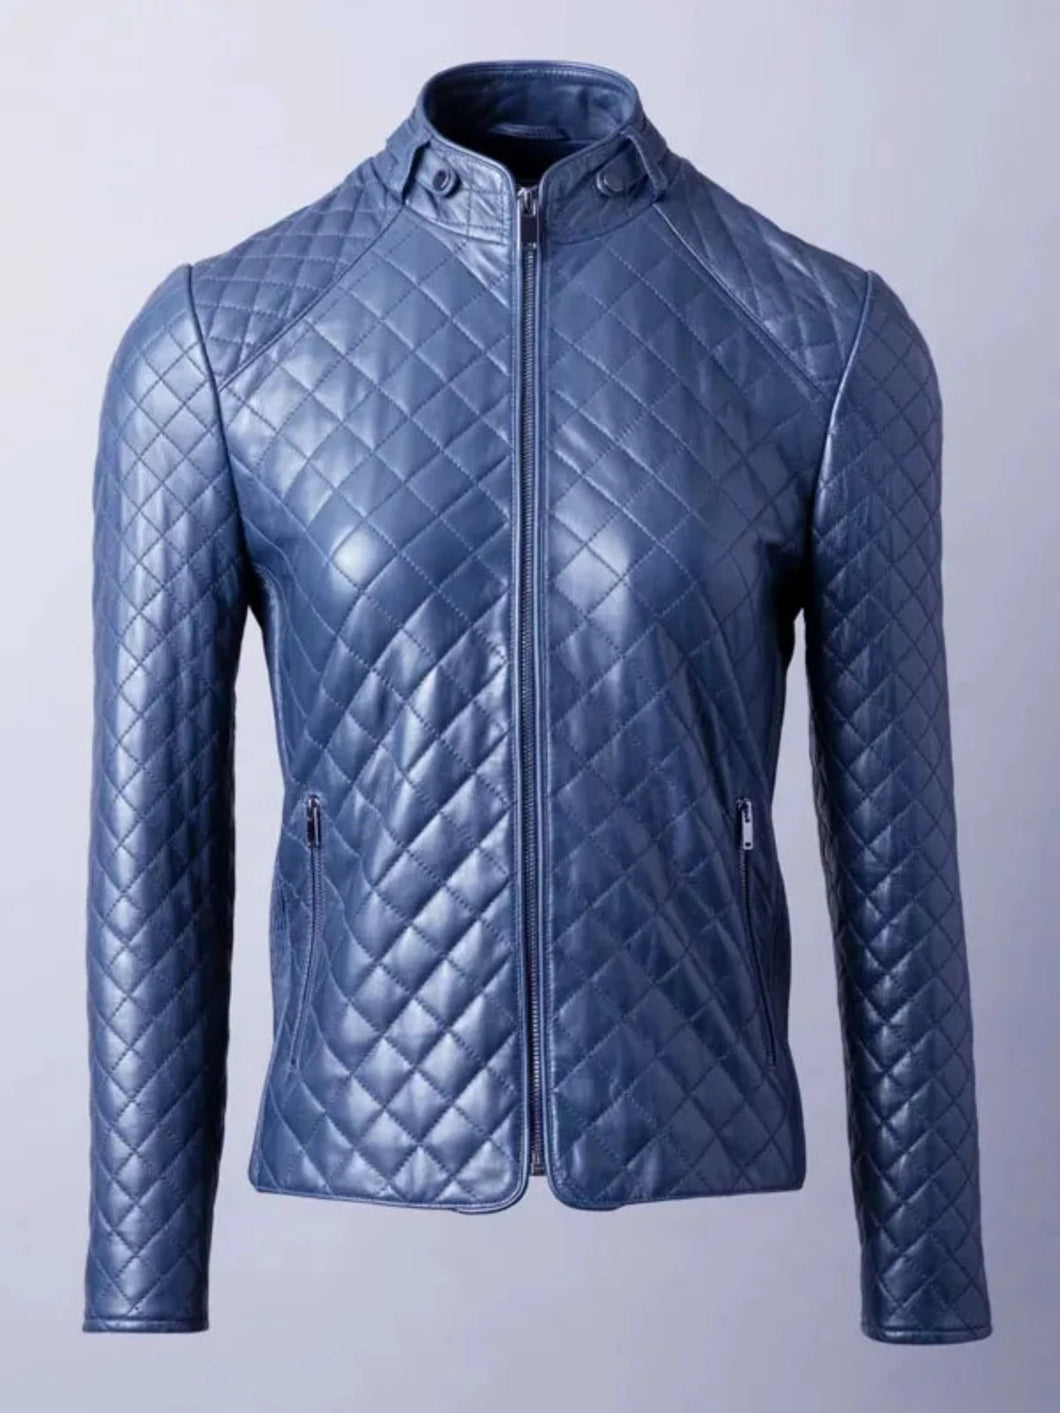 Women’s Stylish Blue Quilted Leather Jacket